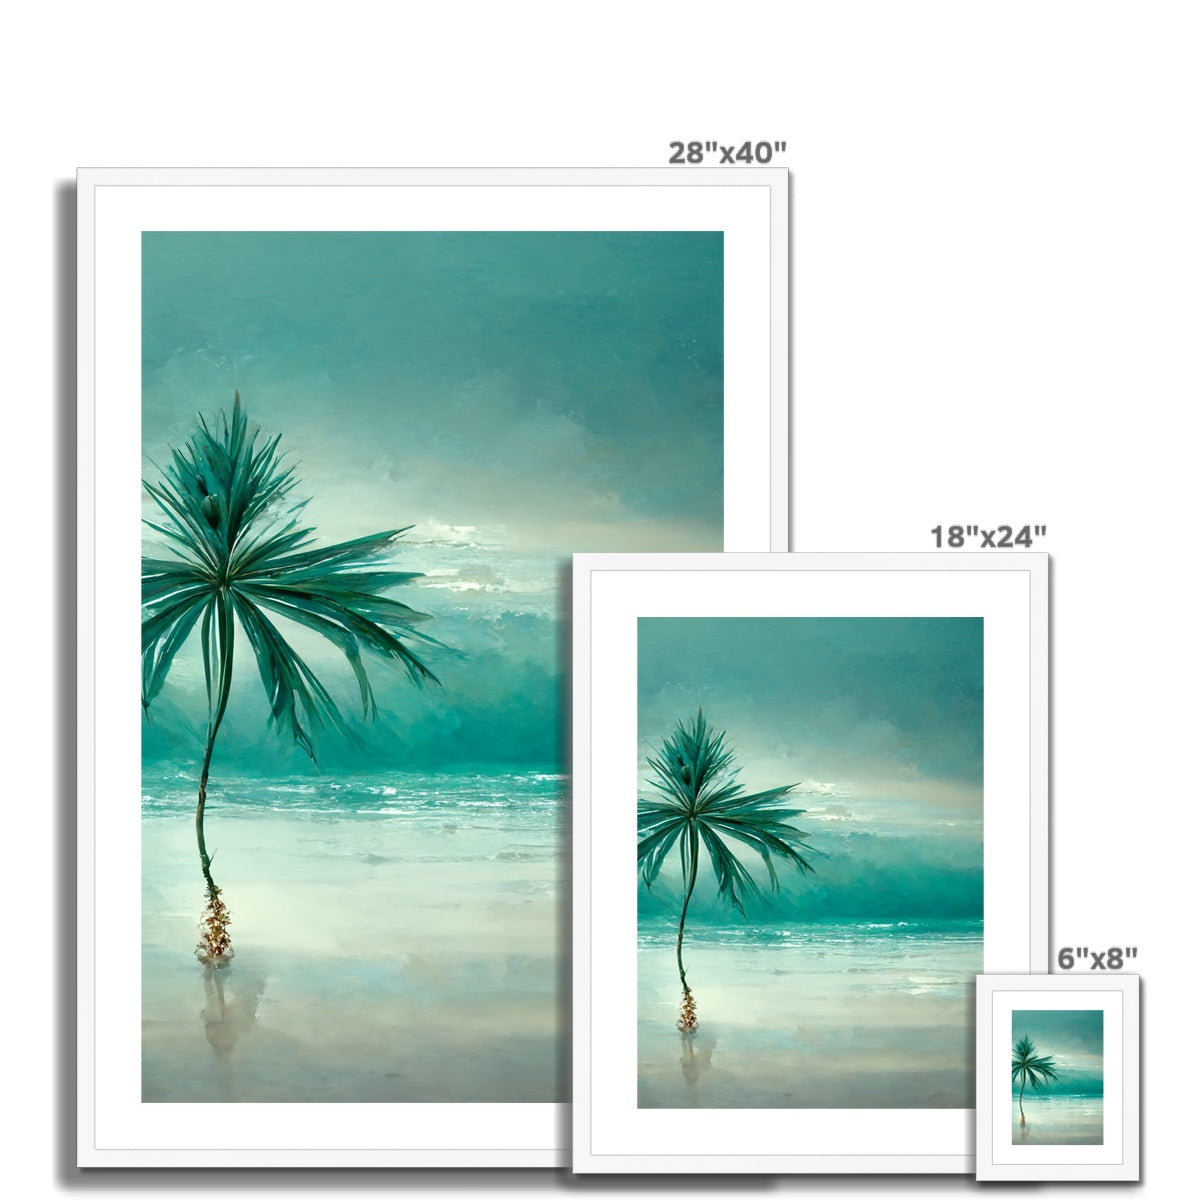 Lonesome Palm Framed & Mounted Print